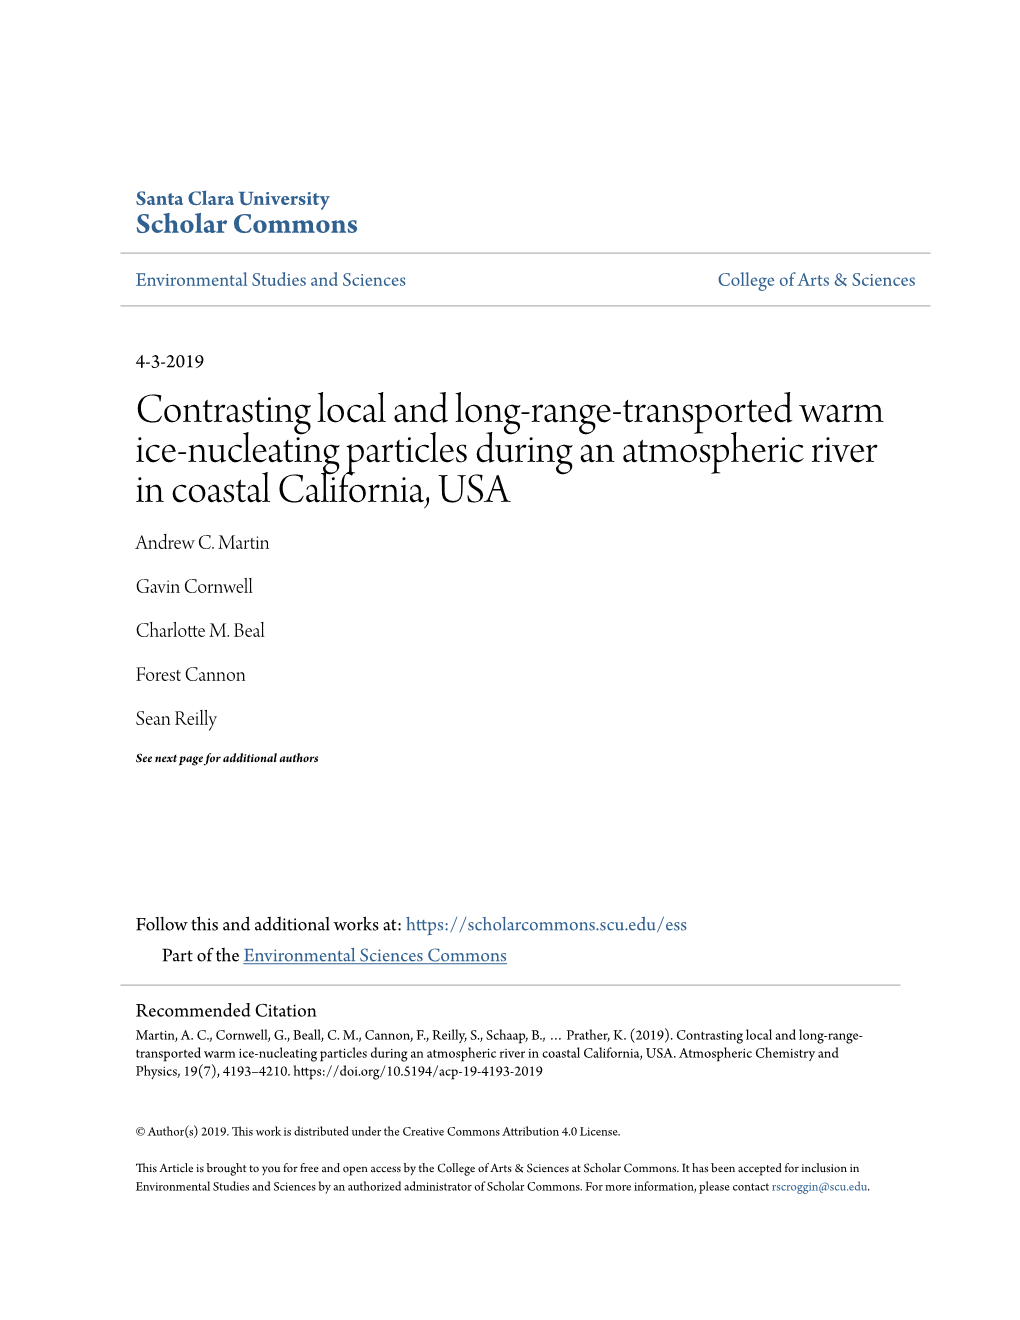 Contrasting Local and Long-Range-Transported Warm Ice-Nucleating Particles During an Atmospheric River in Coastal California, USA Andrew C